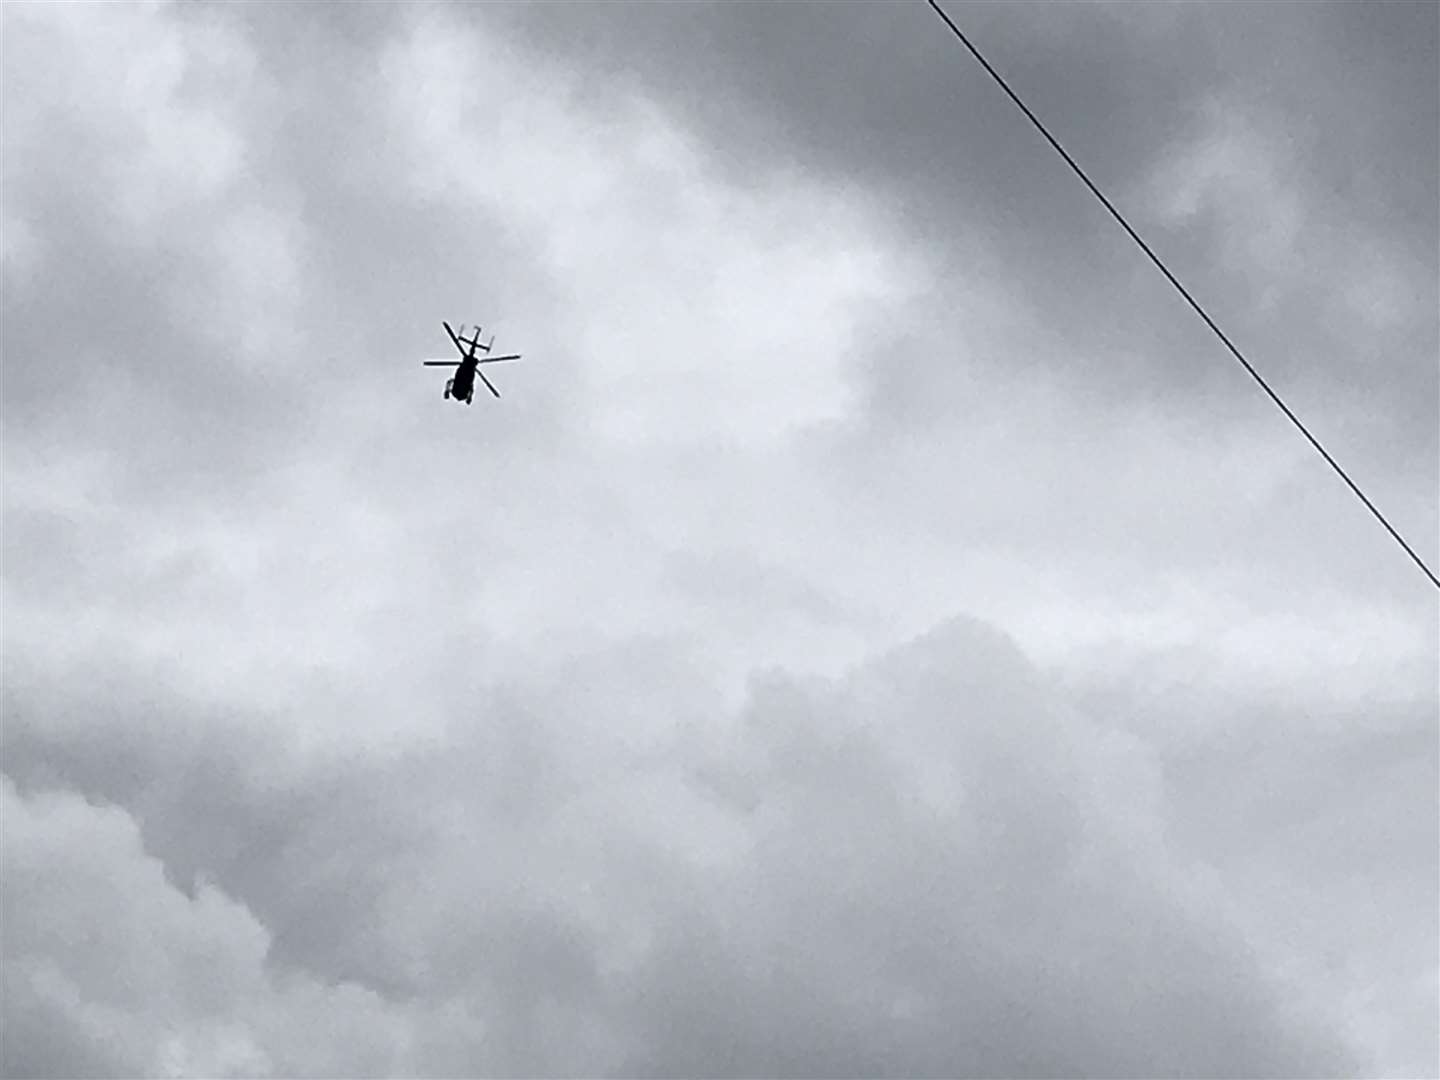 A police helicopter can be seen circulating the River Medway